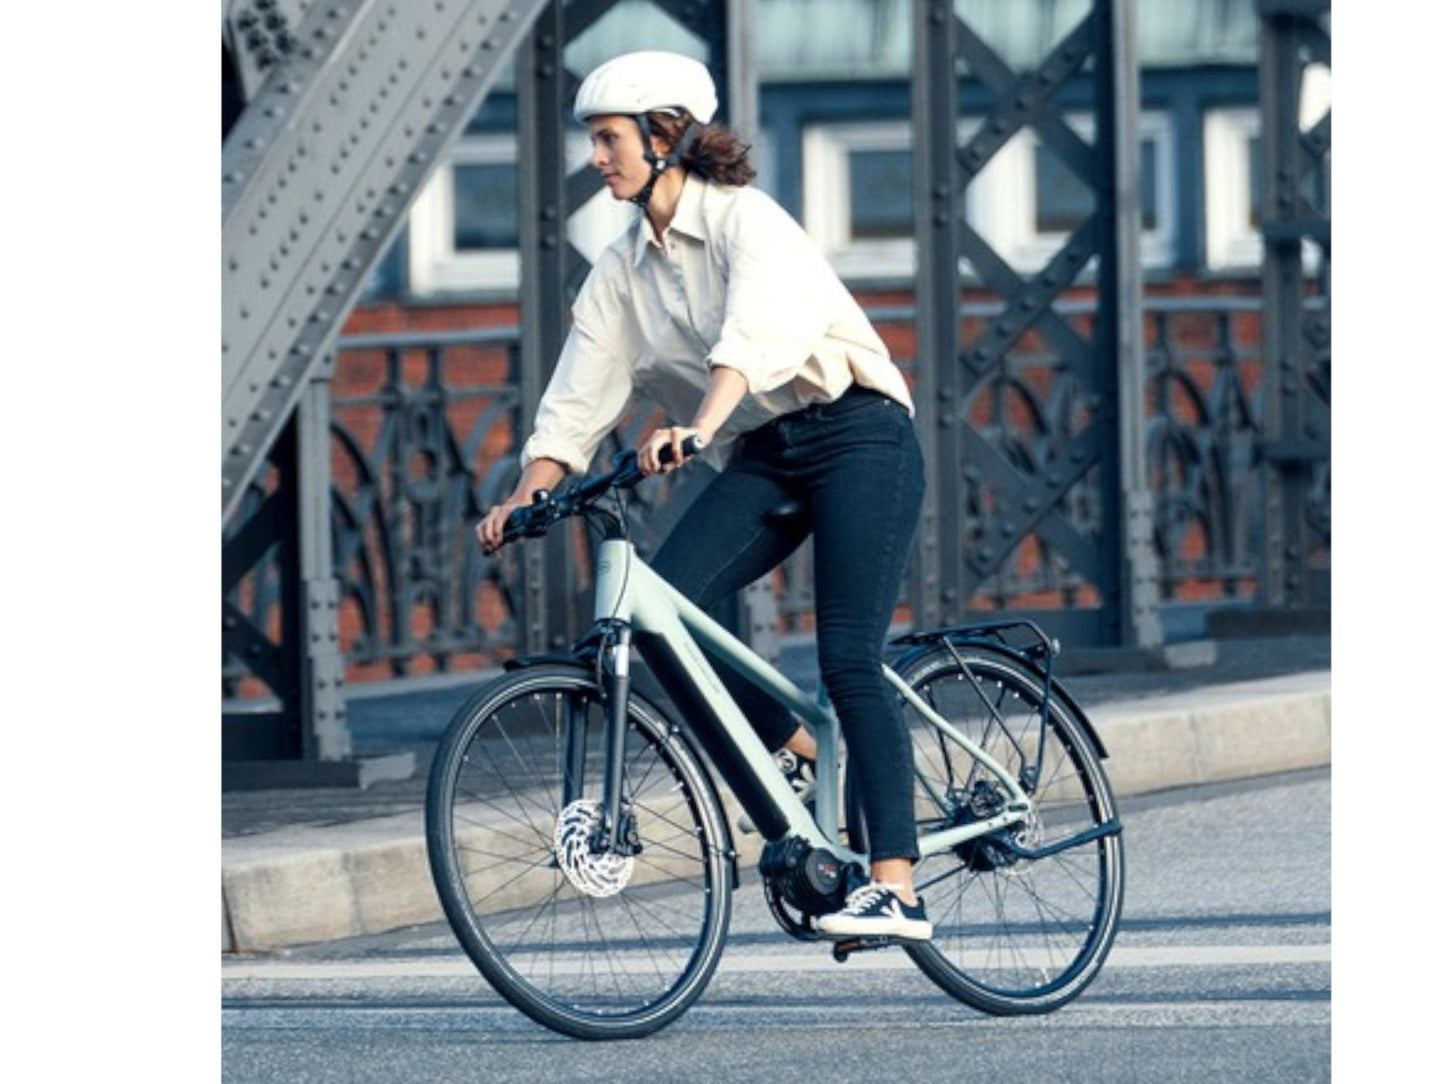 Riese and Muller Roadster Mixte Touring eMTB hardtail woman commuting on city streets